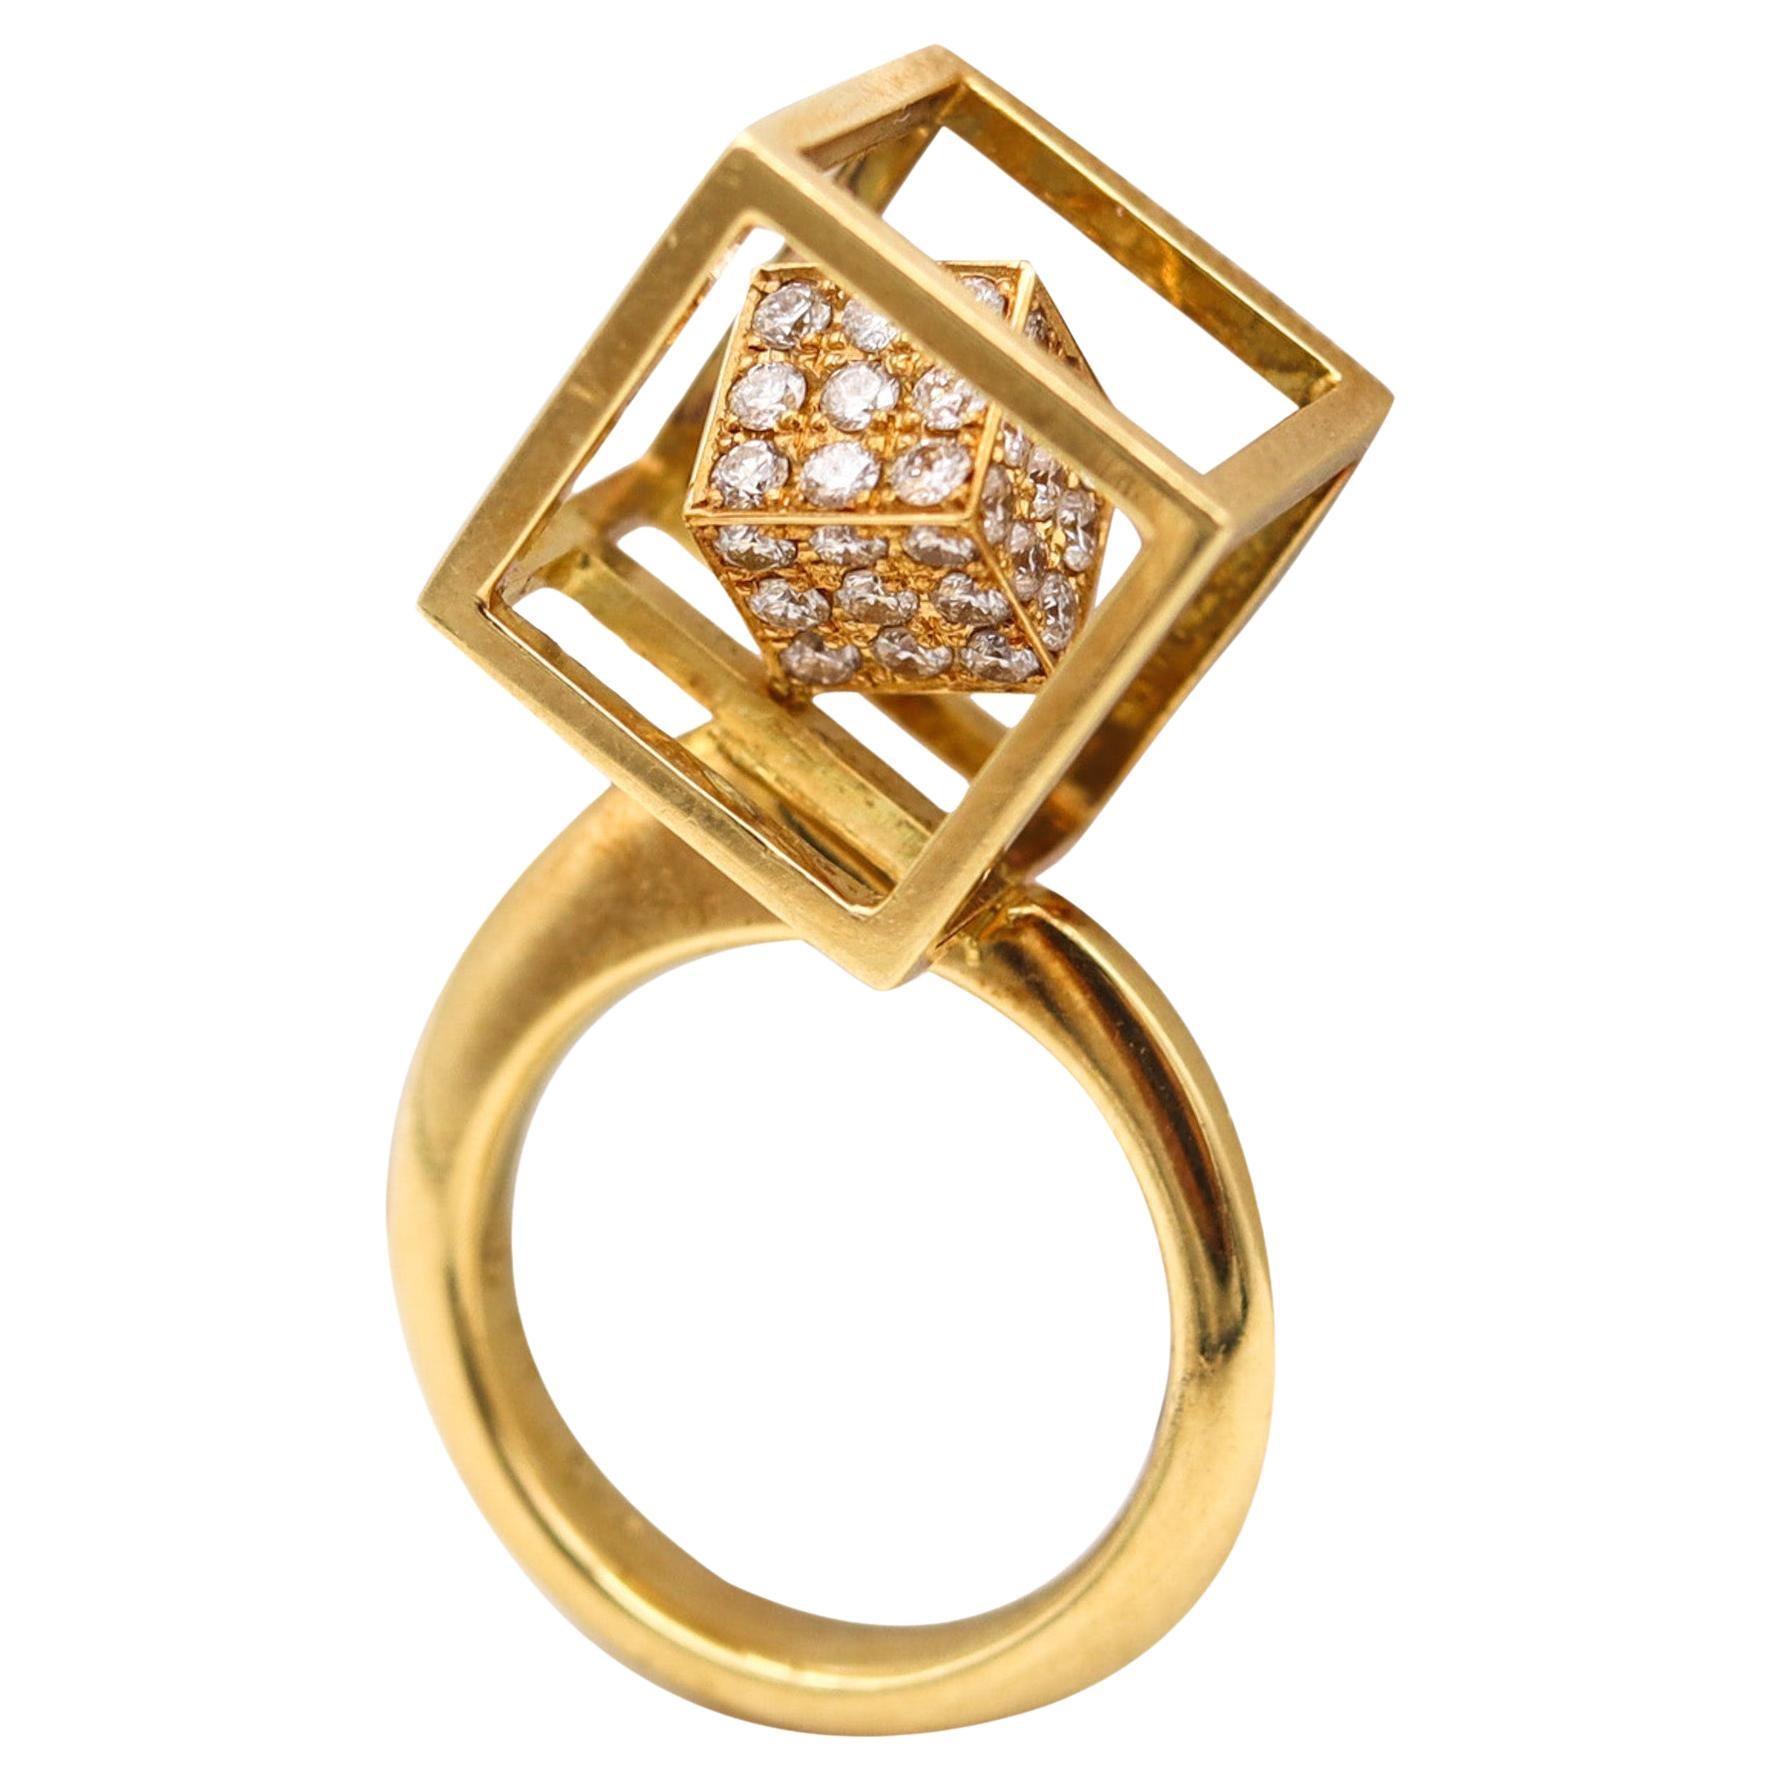 Modernist Sculptural Op Art Ring In 18Kt Yellow Gold With 1.20 Ctw In Diamonds